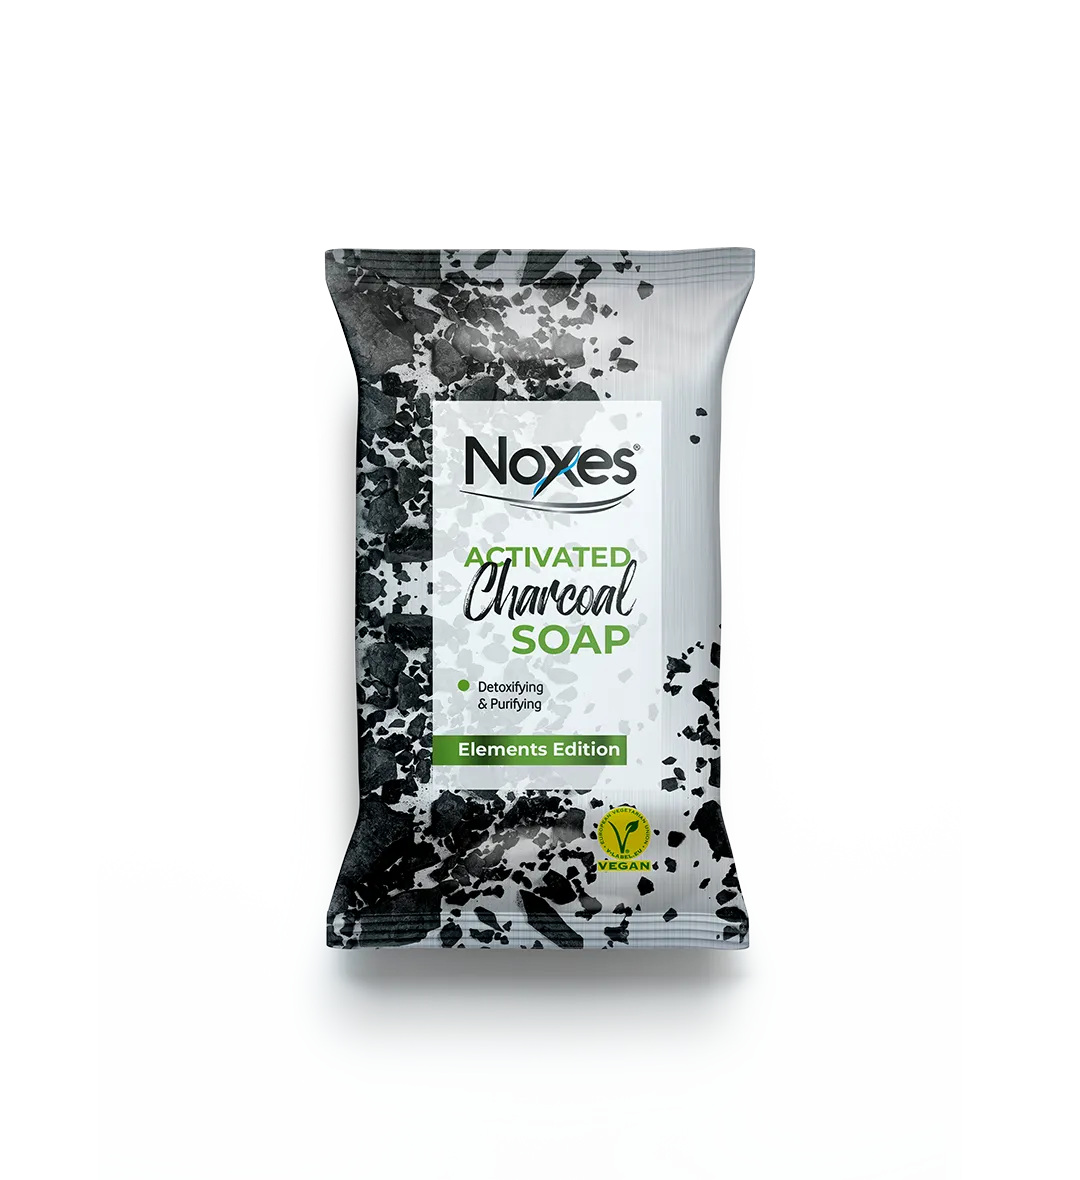 NOXES 100 GR FLOWPACK ELEMENTS EDITION ACTIVATED CHARCOAL SOAP